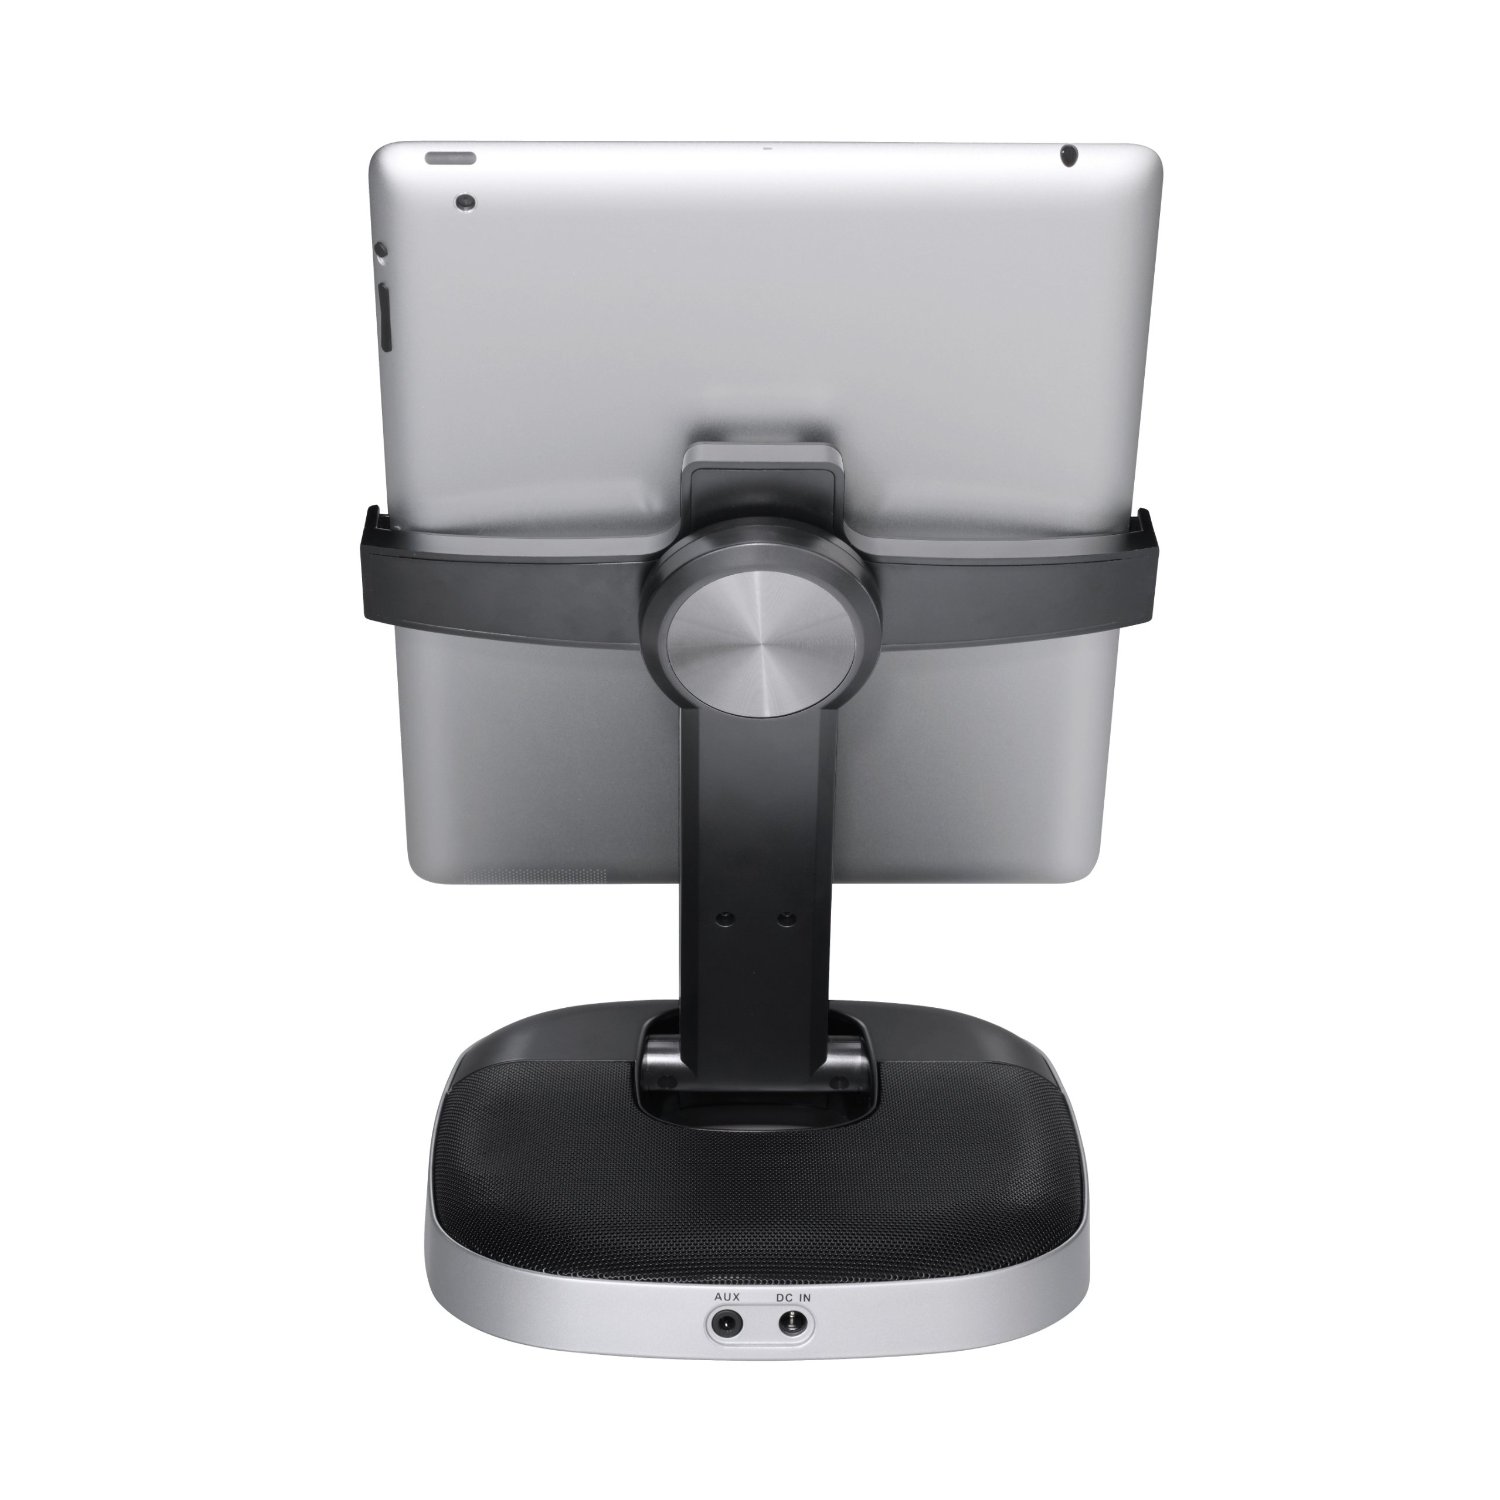 http://thetechjournal.com/wp-content/uploads/images/1203/1331142371-logitech-speaker-stand-and-charging-station-for-ipad--8.jpg